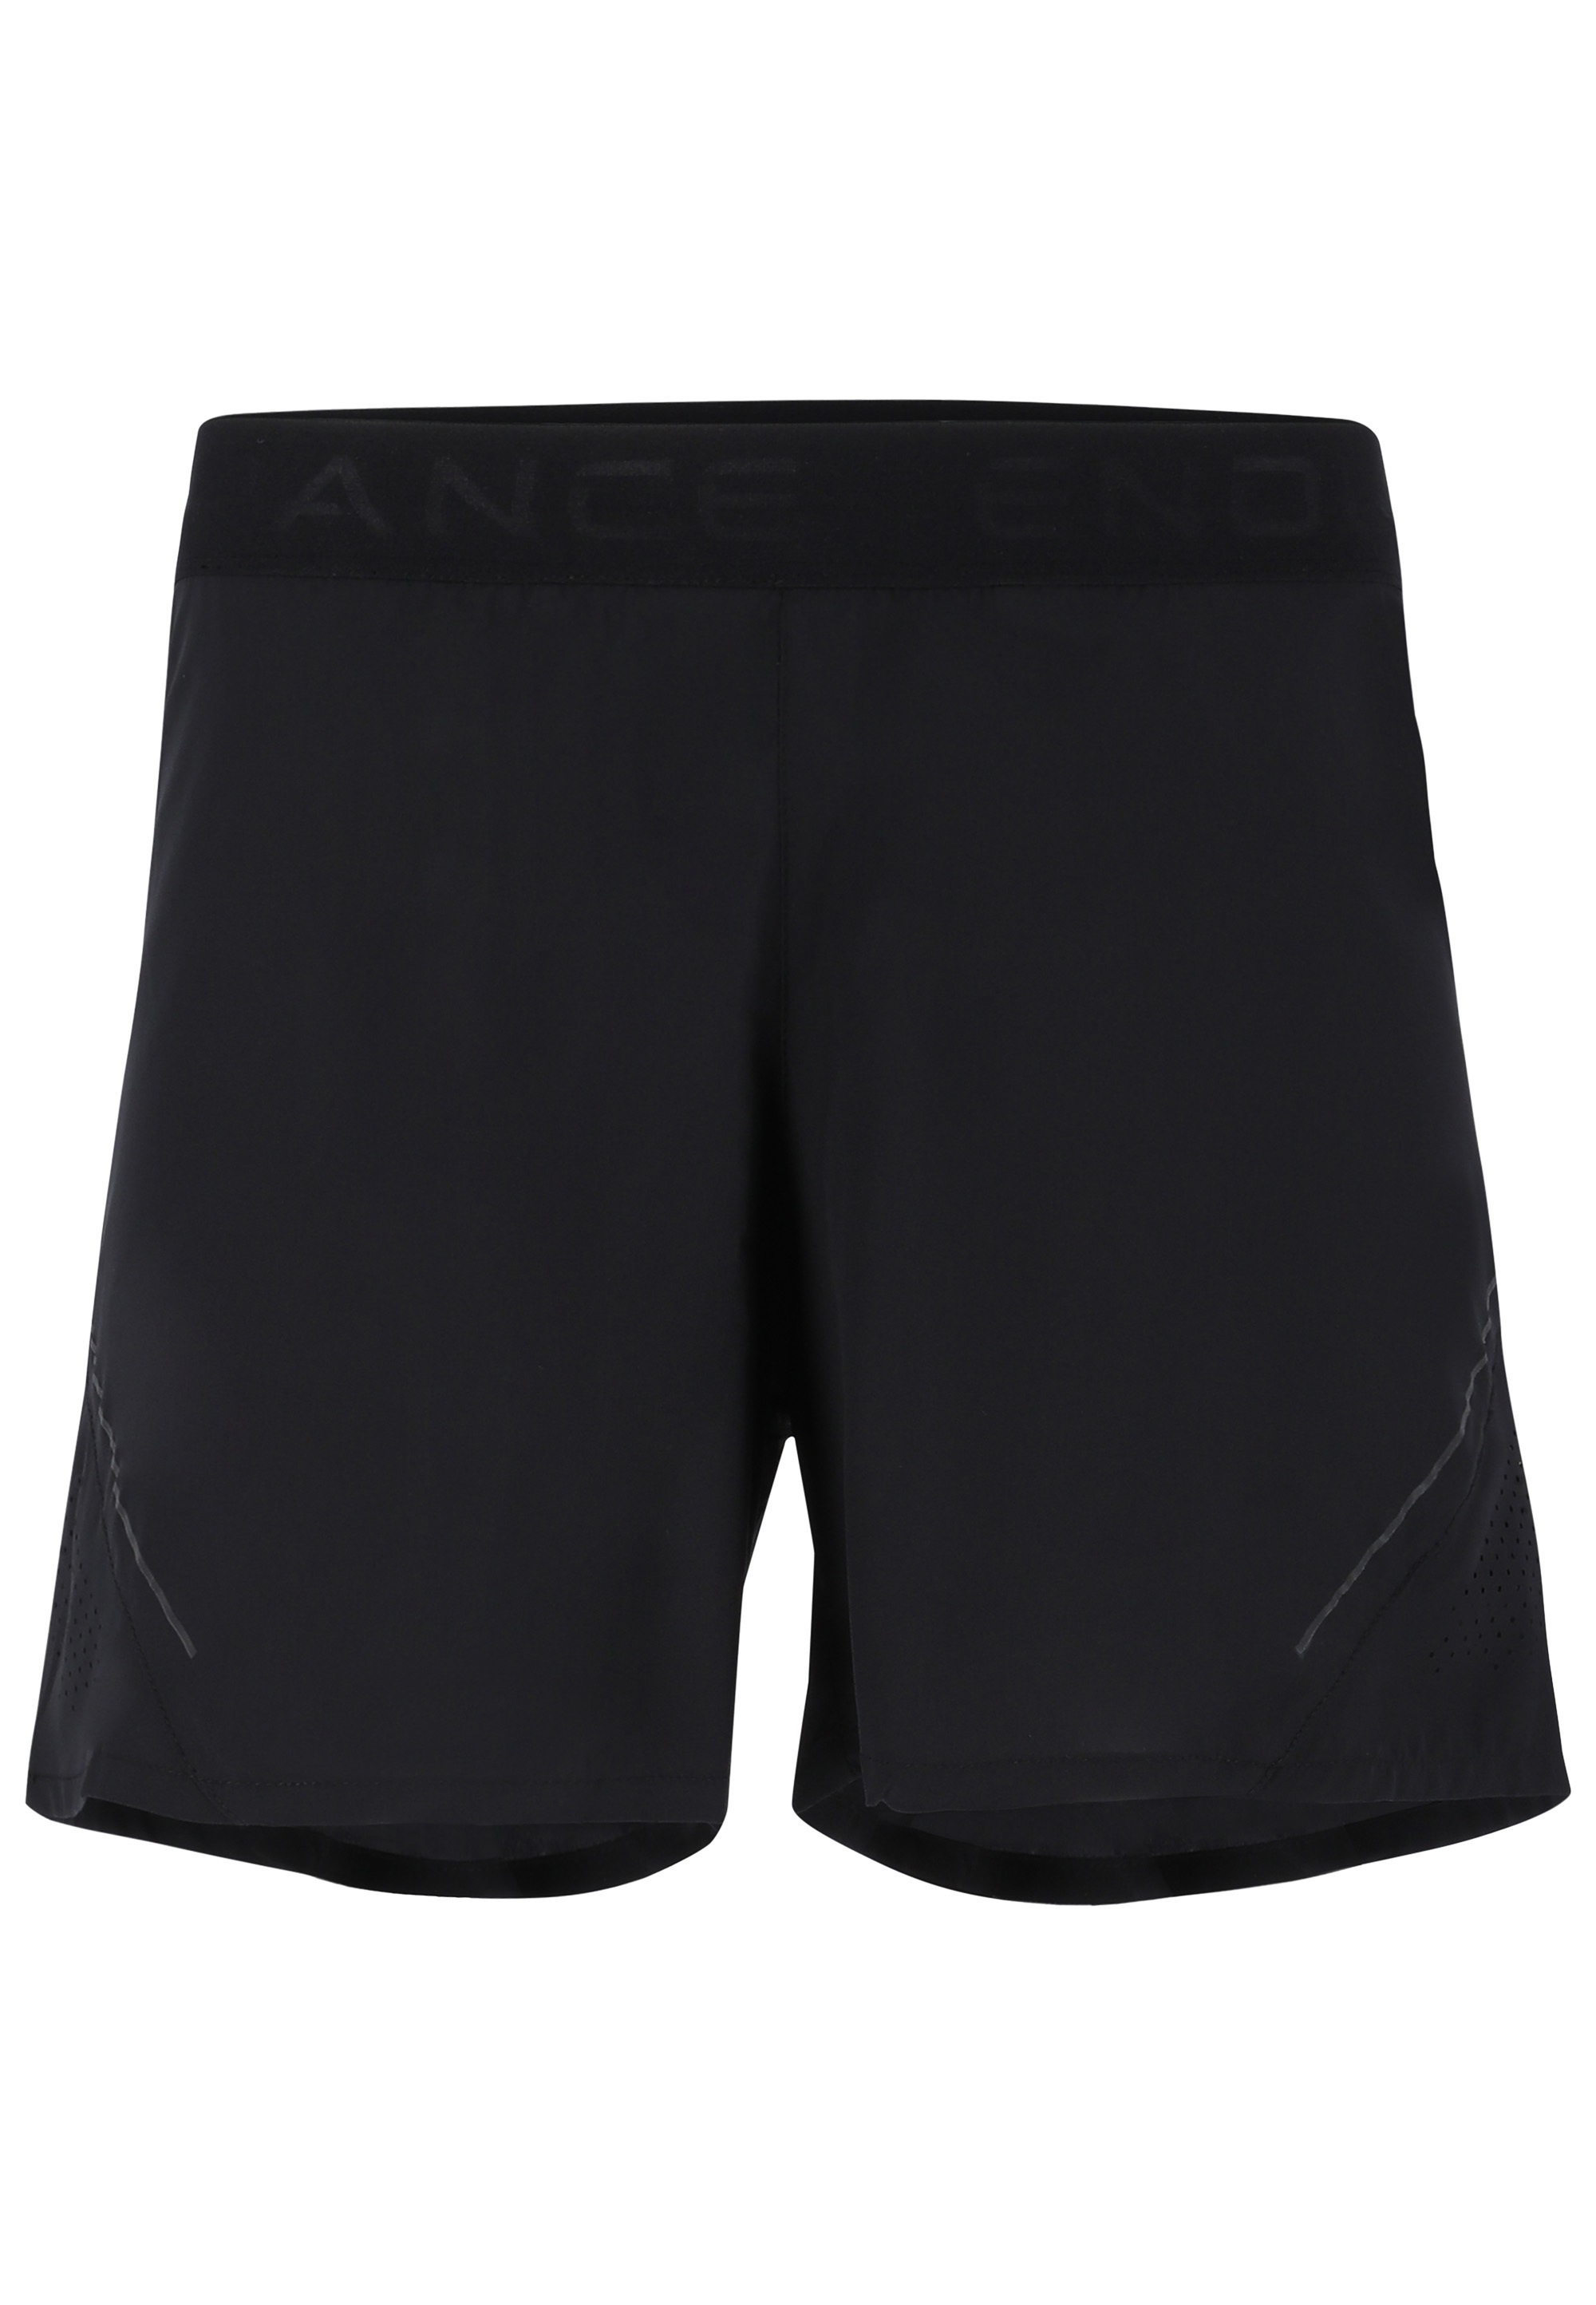 ENDURANCE Shorts »Airy«, mit Quickdry-Technologie